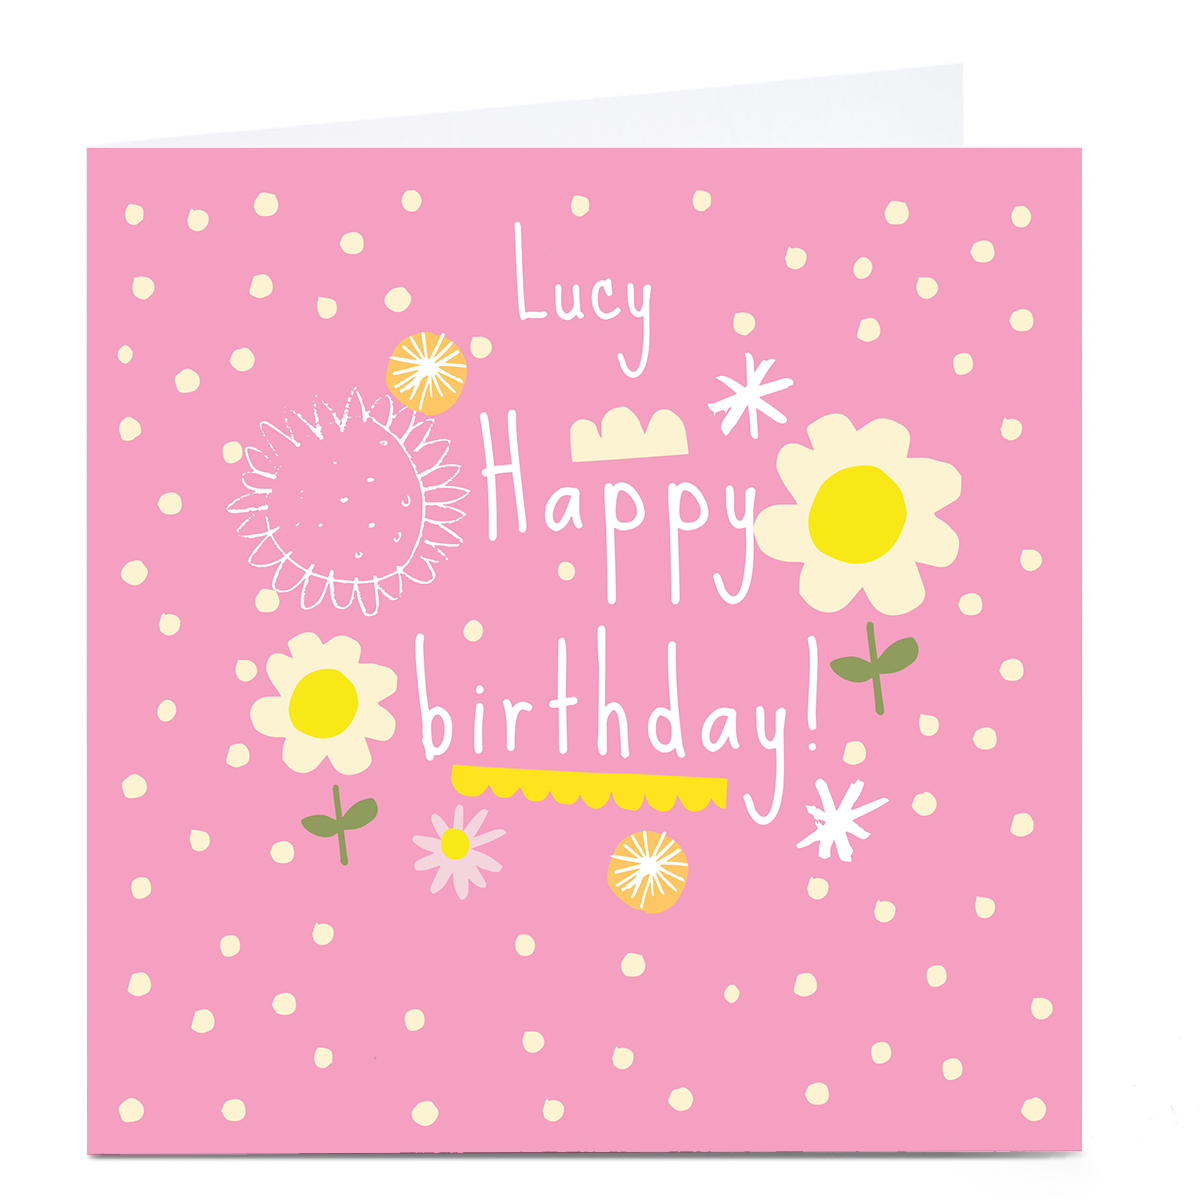 Personalised Squirrel Bandit Birthday Card - Pink and Daisies